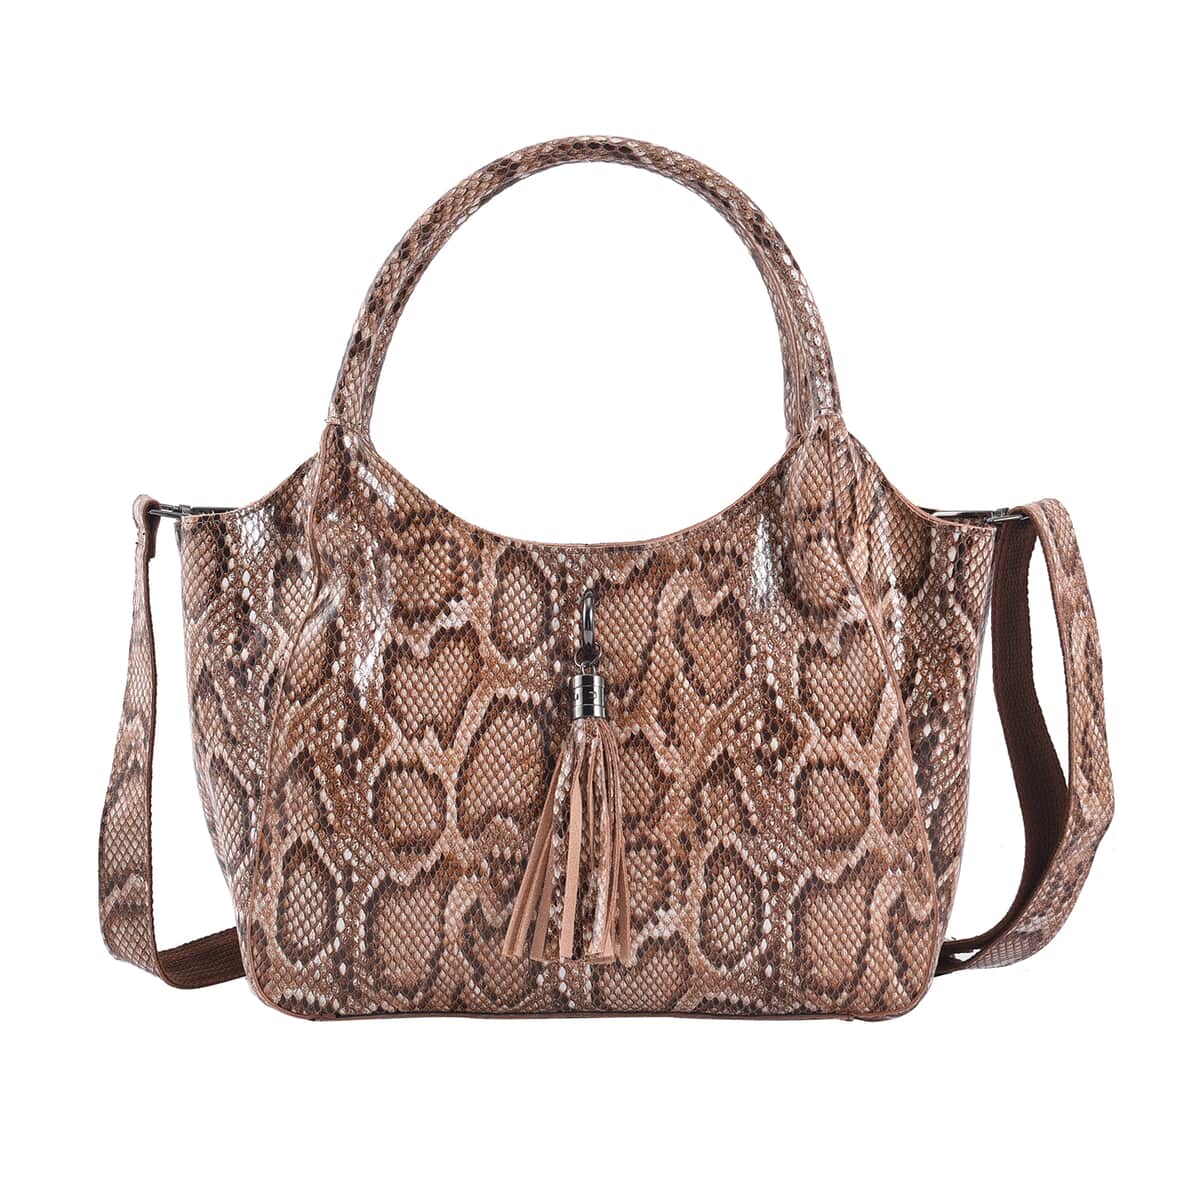 Khaki and Black Snake Print Genuine Leather Hobo Bag with Detachable Shoulder Strap and Handle Drop image number 0